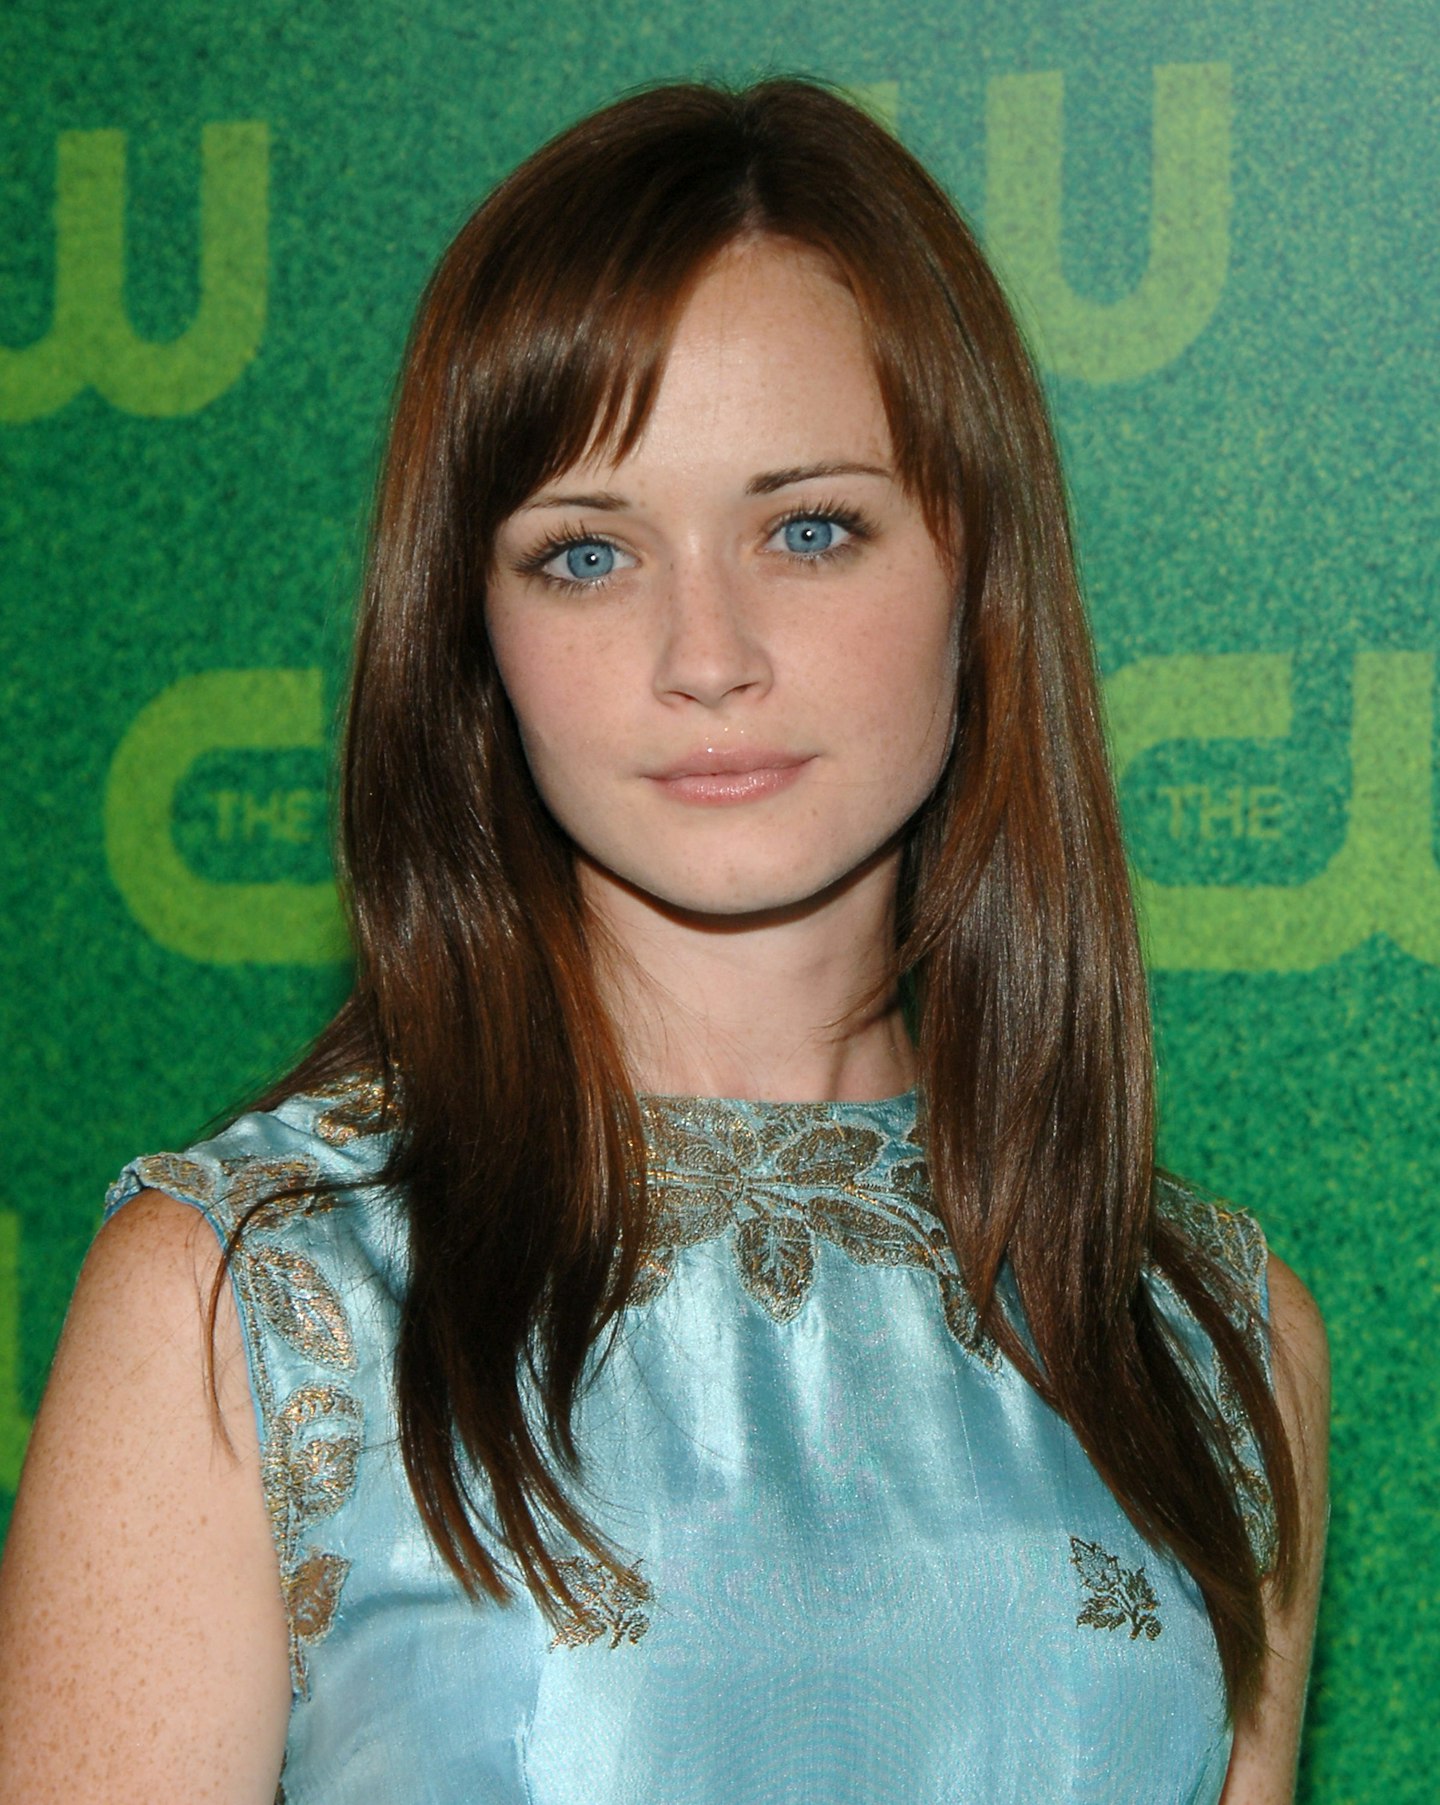 17 Things You Never Knew About Alexis Bledel